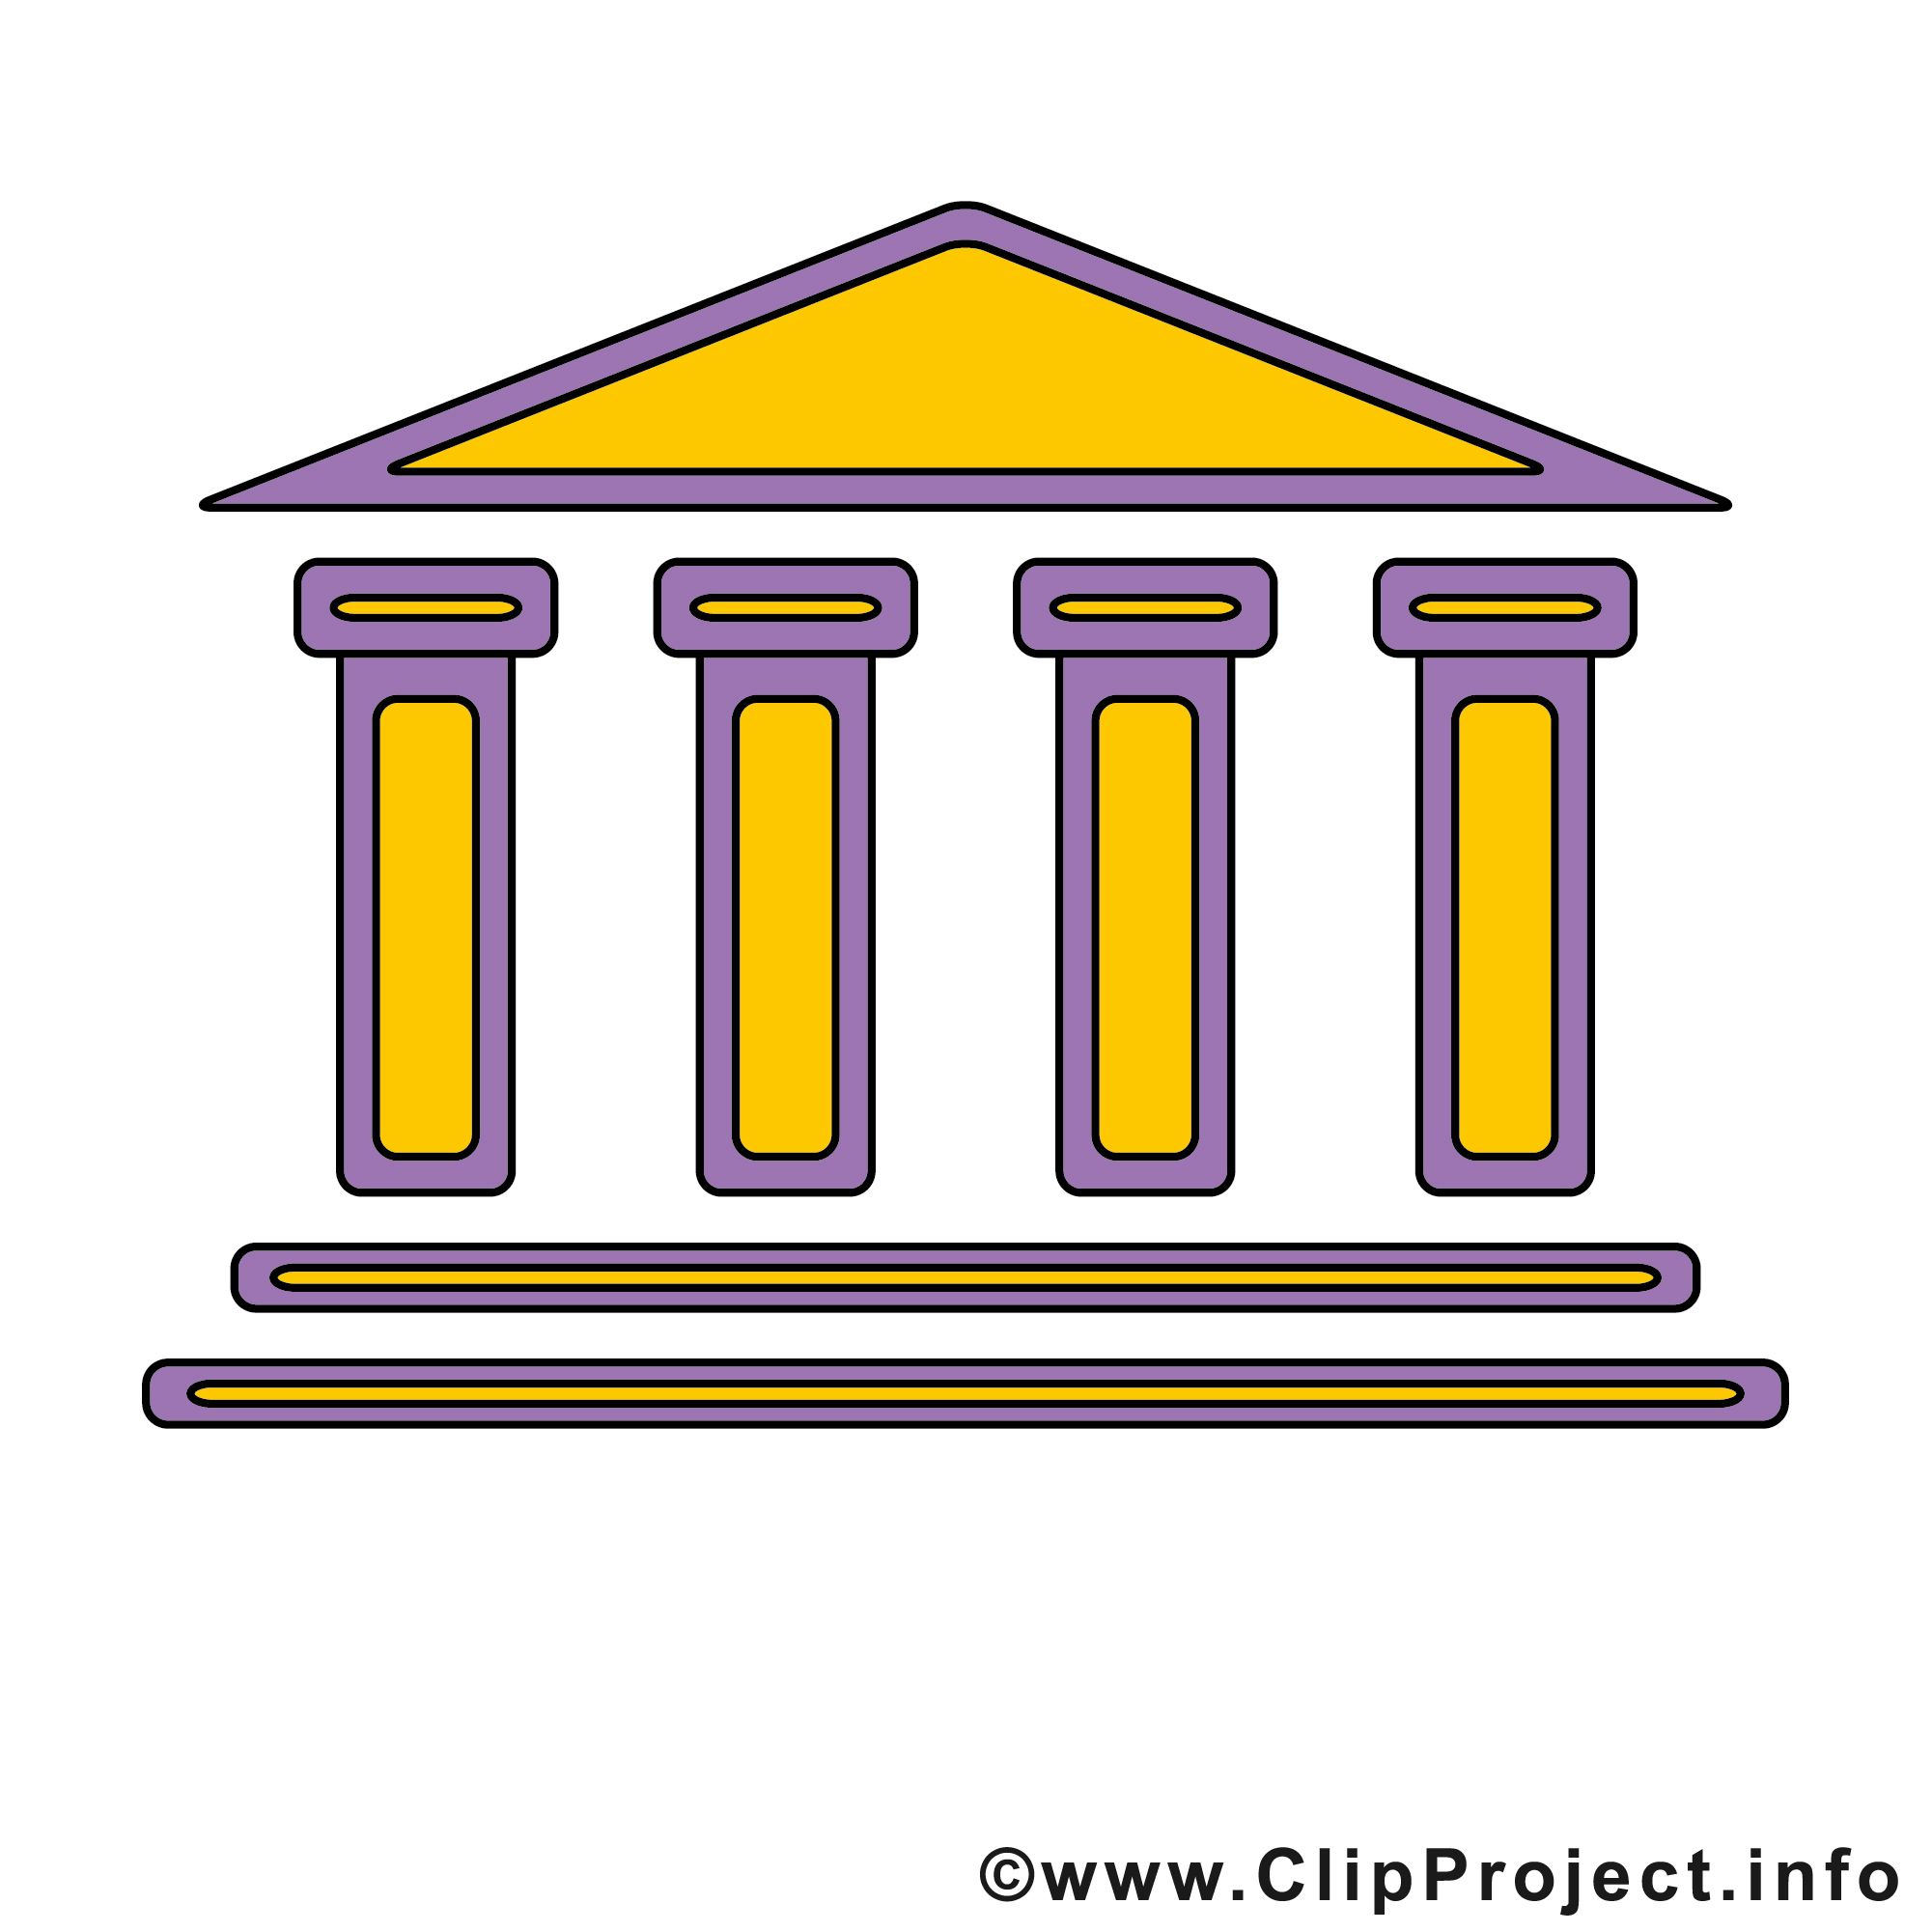 clipart of bank - photo #25